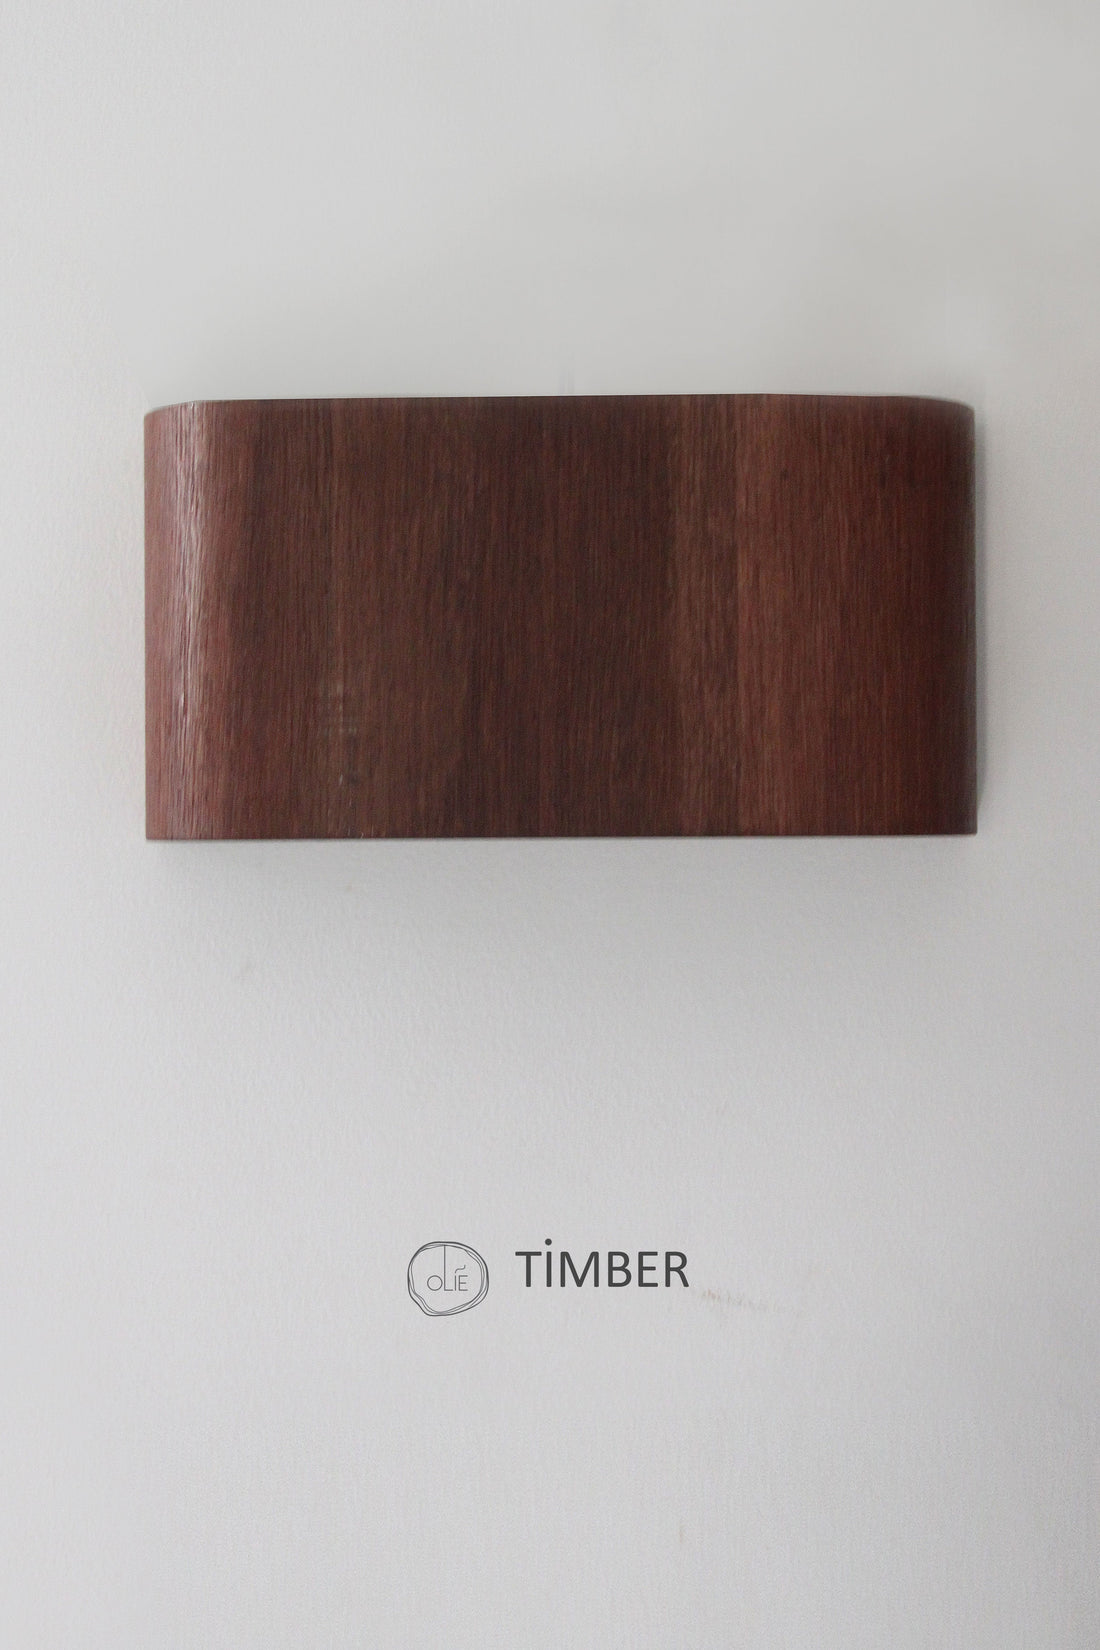 Timber Wall Lamp in stock